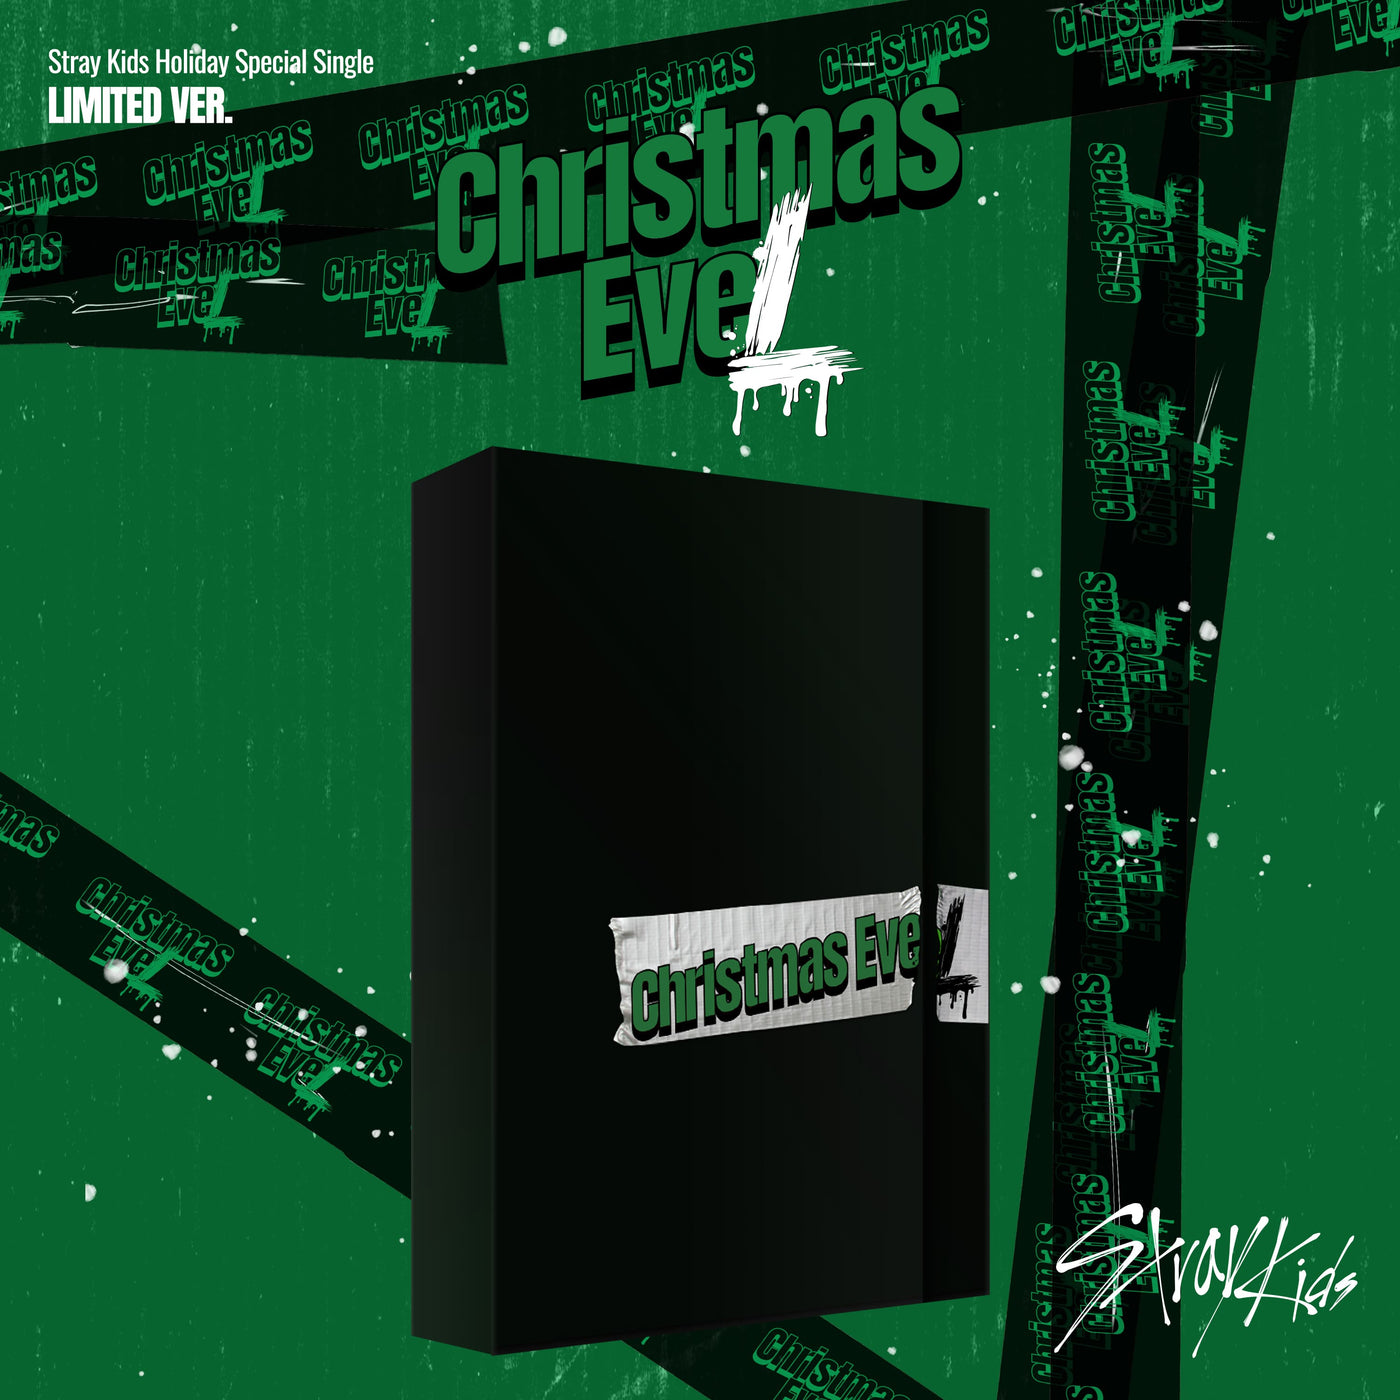 Stray Kids Holiday Special Single [Christmas EveL] (LIMITED VER) 🇰🇷